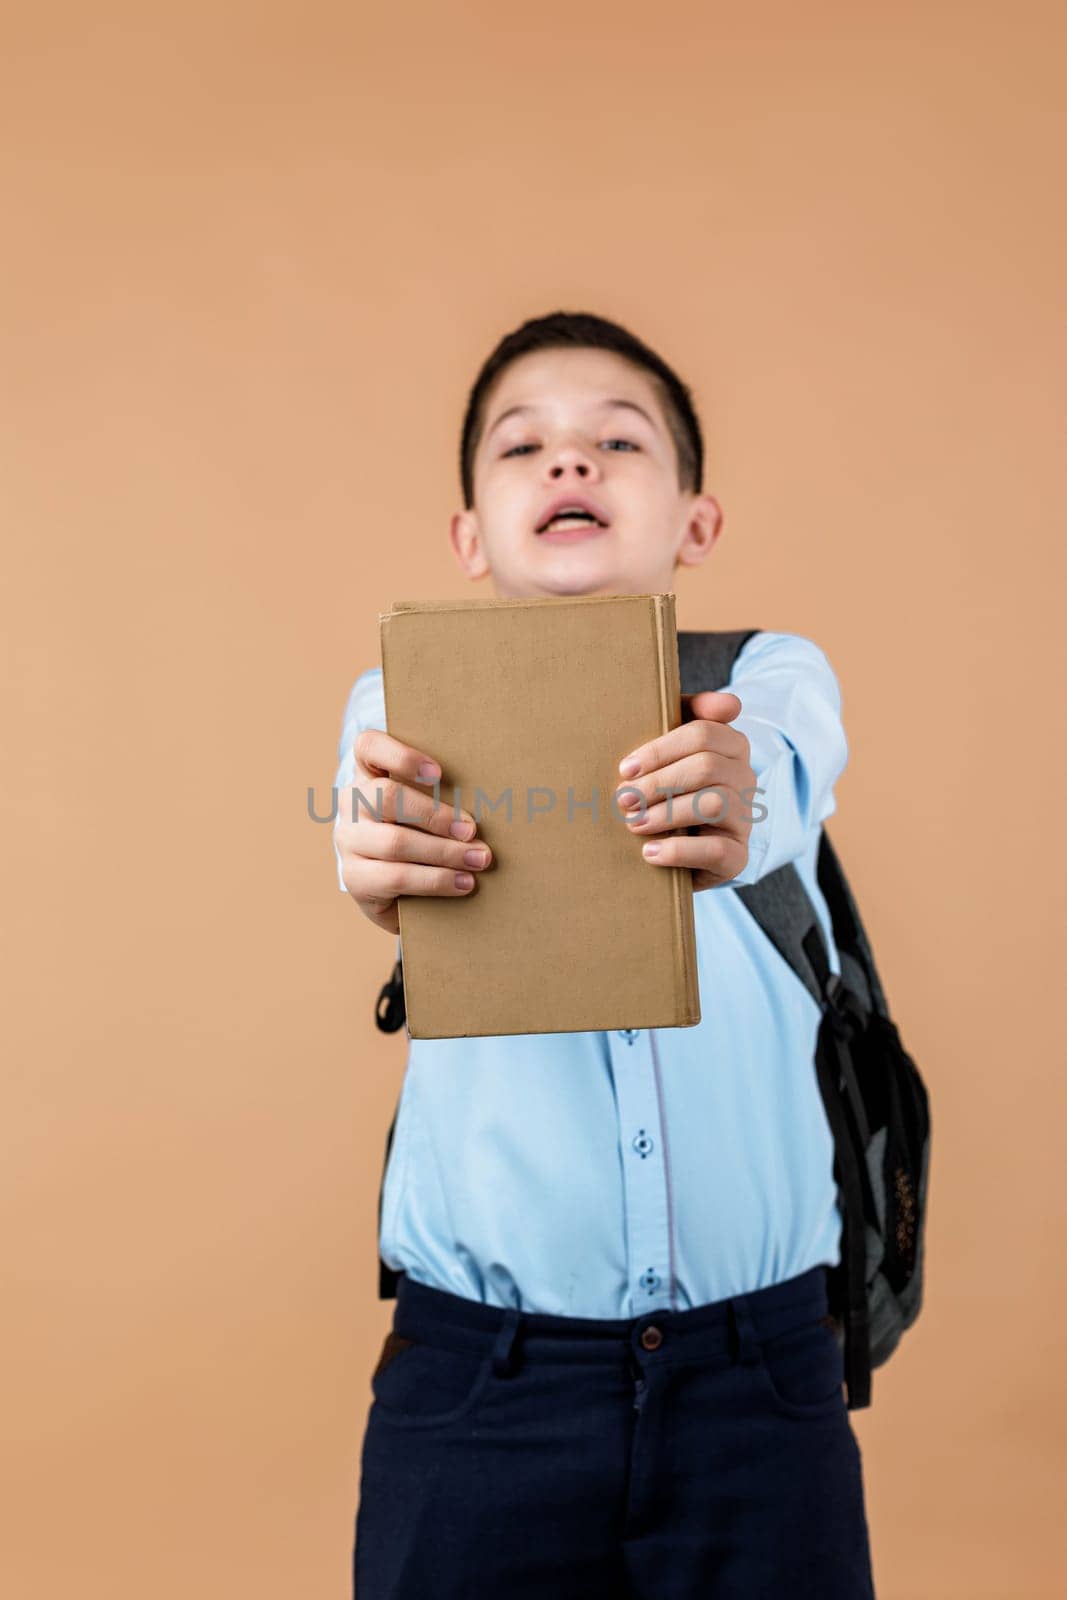 little cheerful school boy with backpack giving book over beige background. focus on book